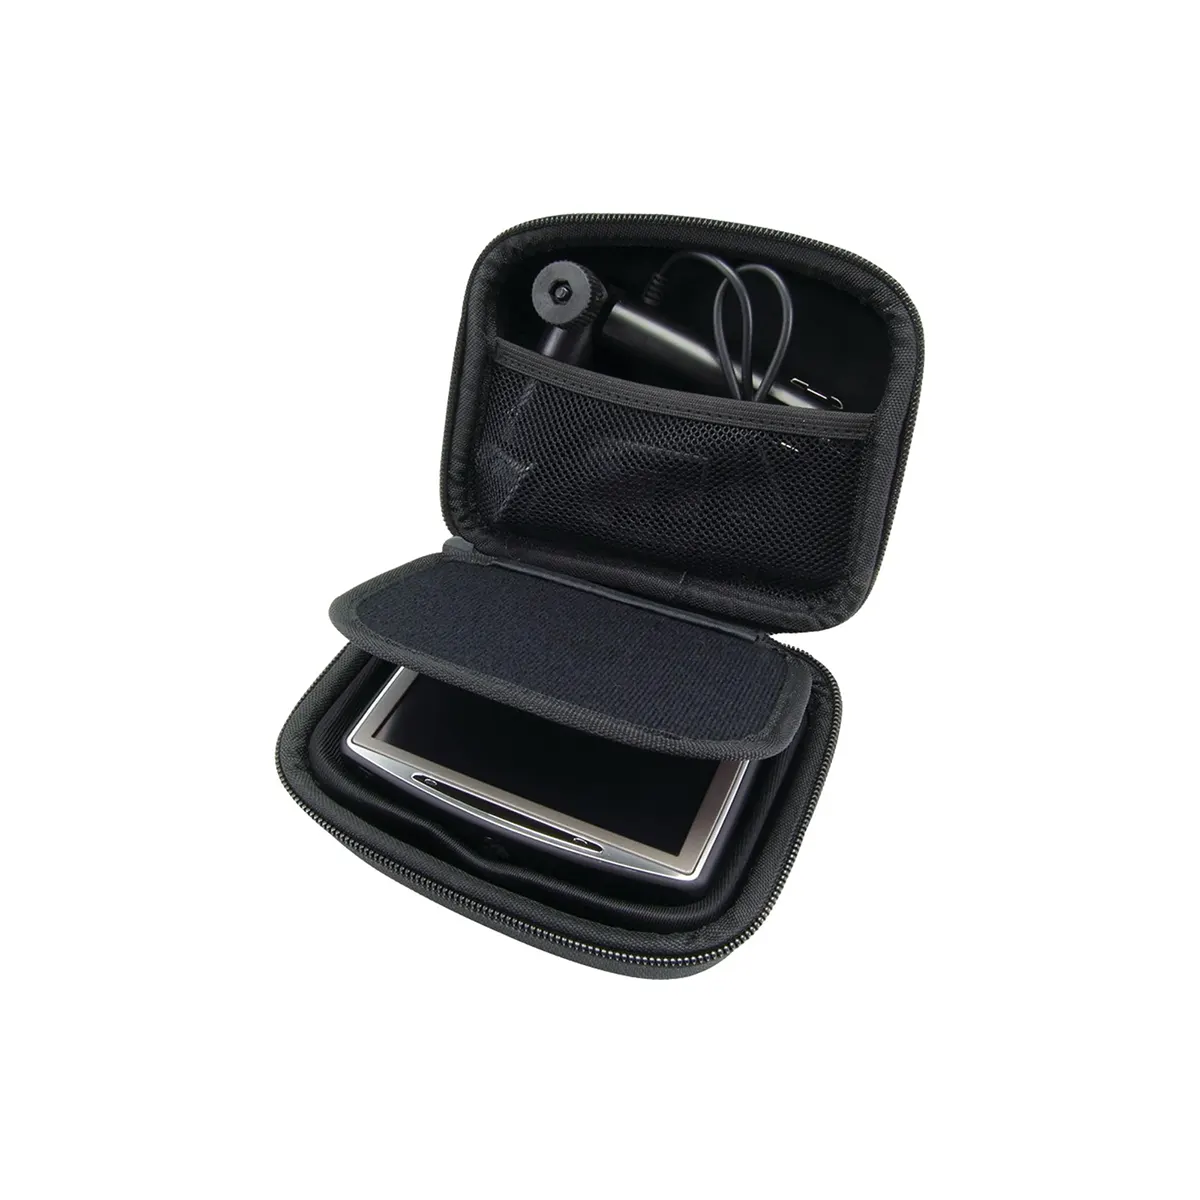 Arkon Carrying Case for 3.5, 4.3-Inch GPS Devices